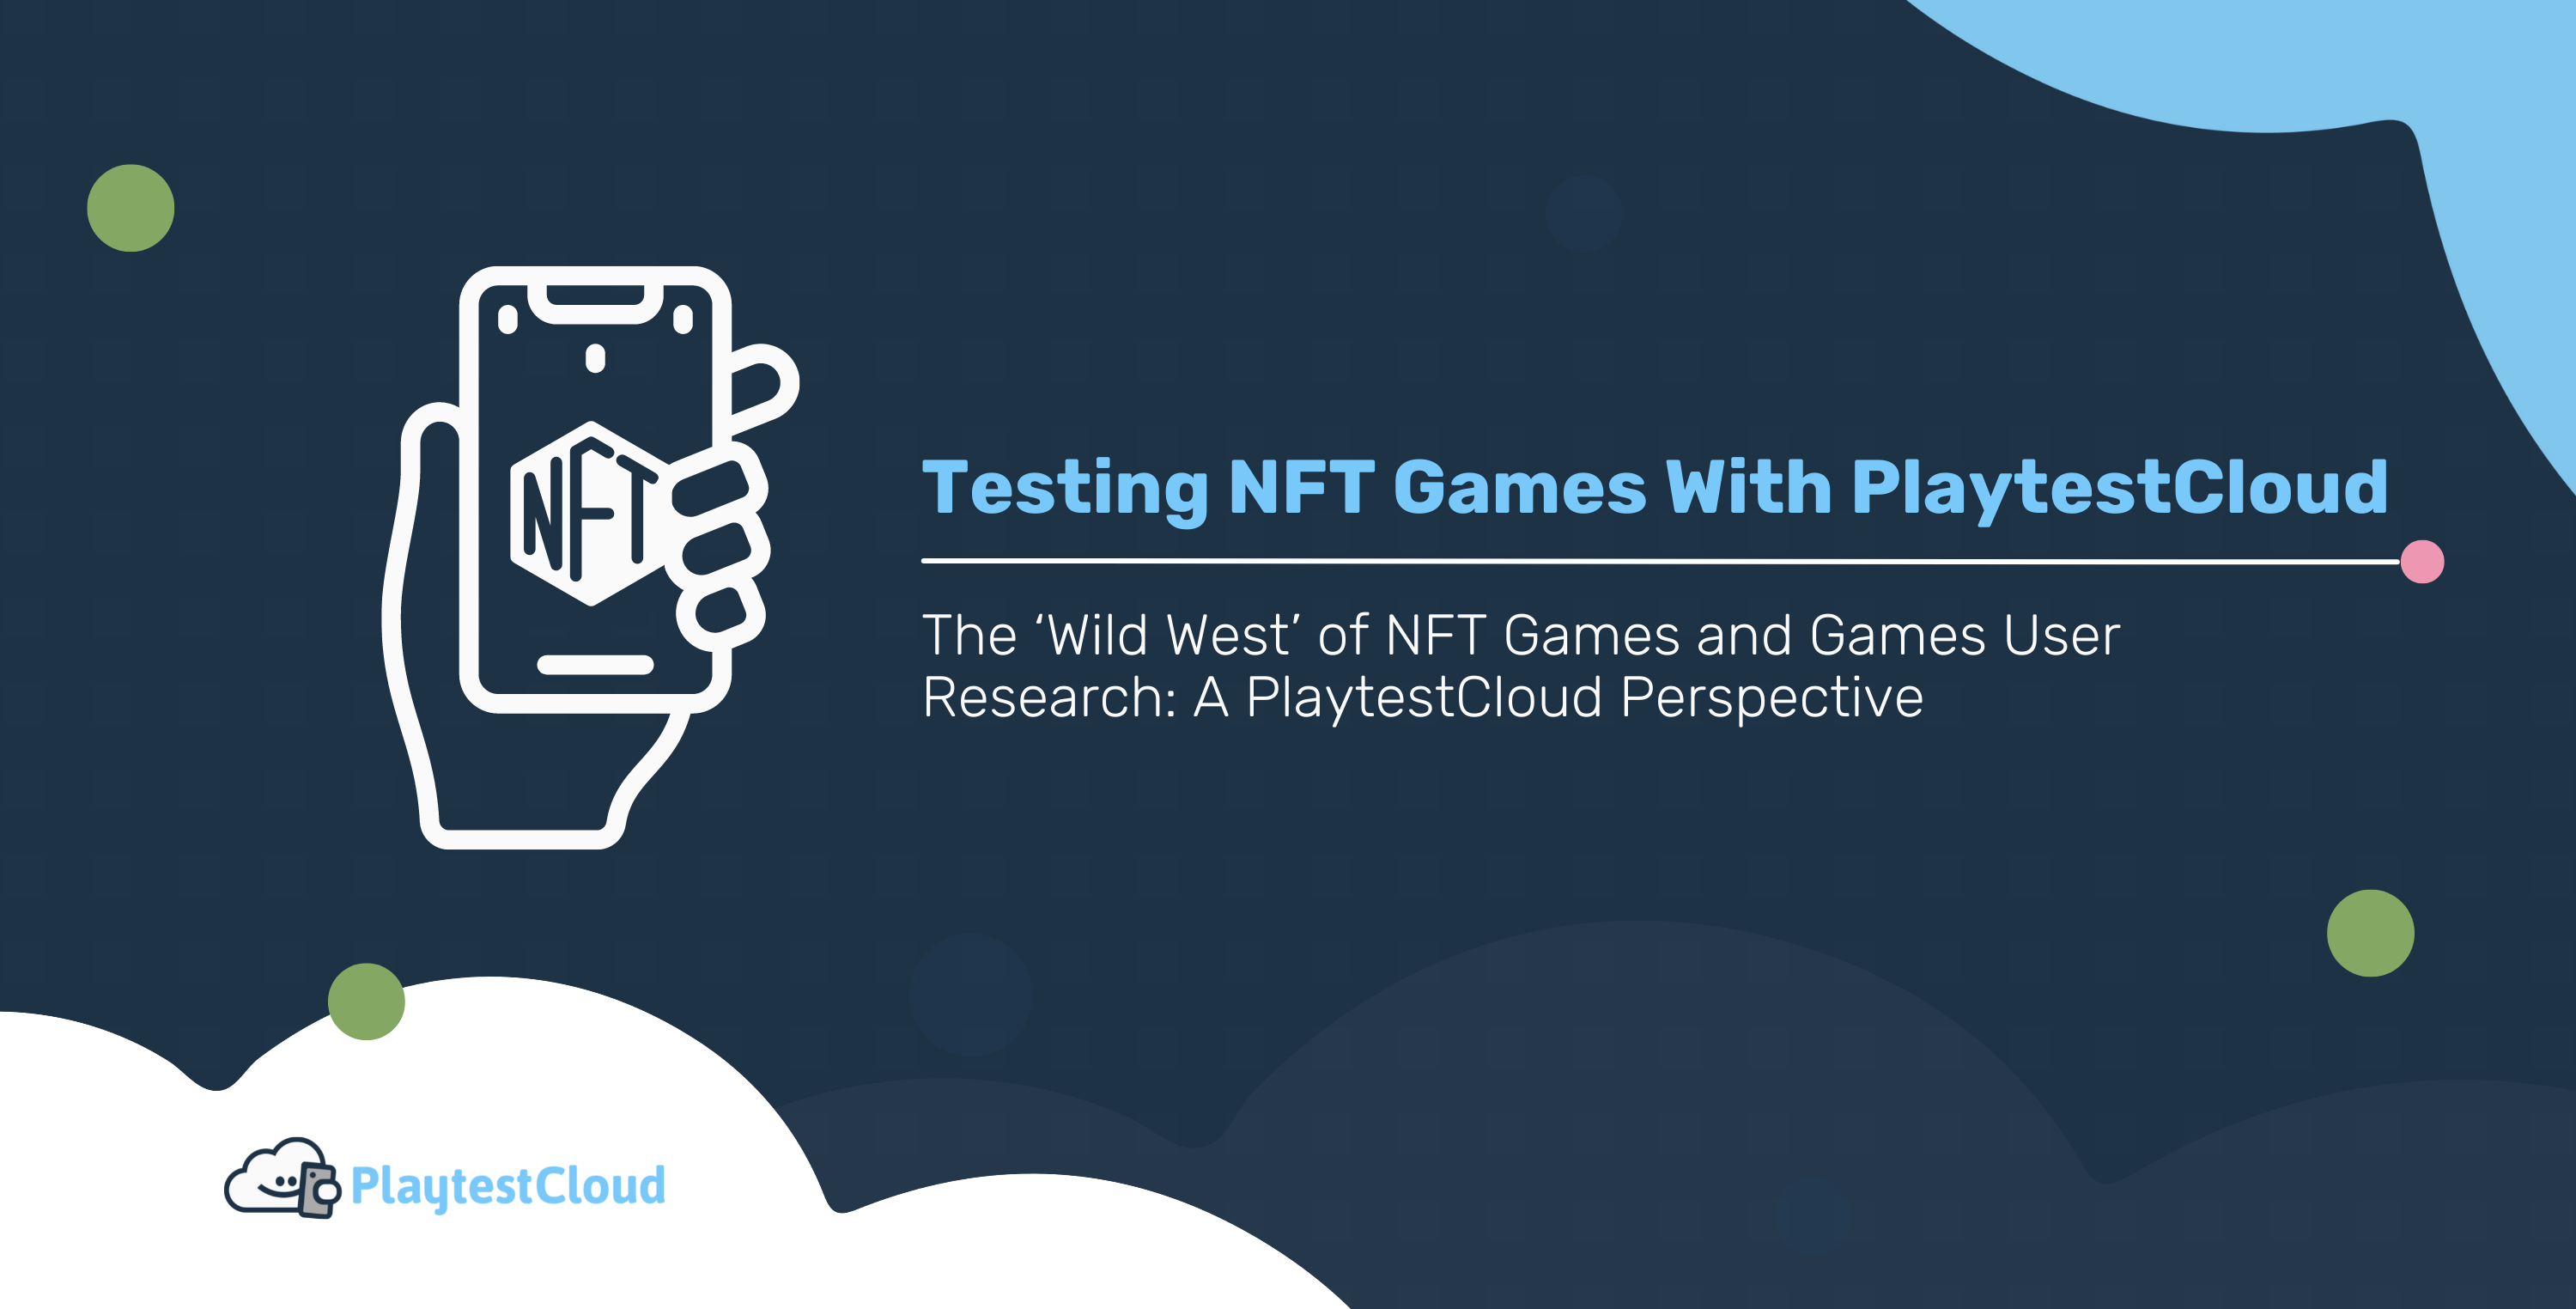 The ‘Wild West’ of NFT Games and Games User Research